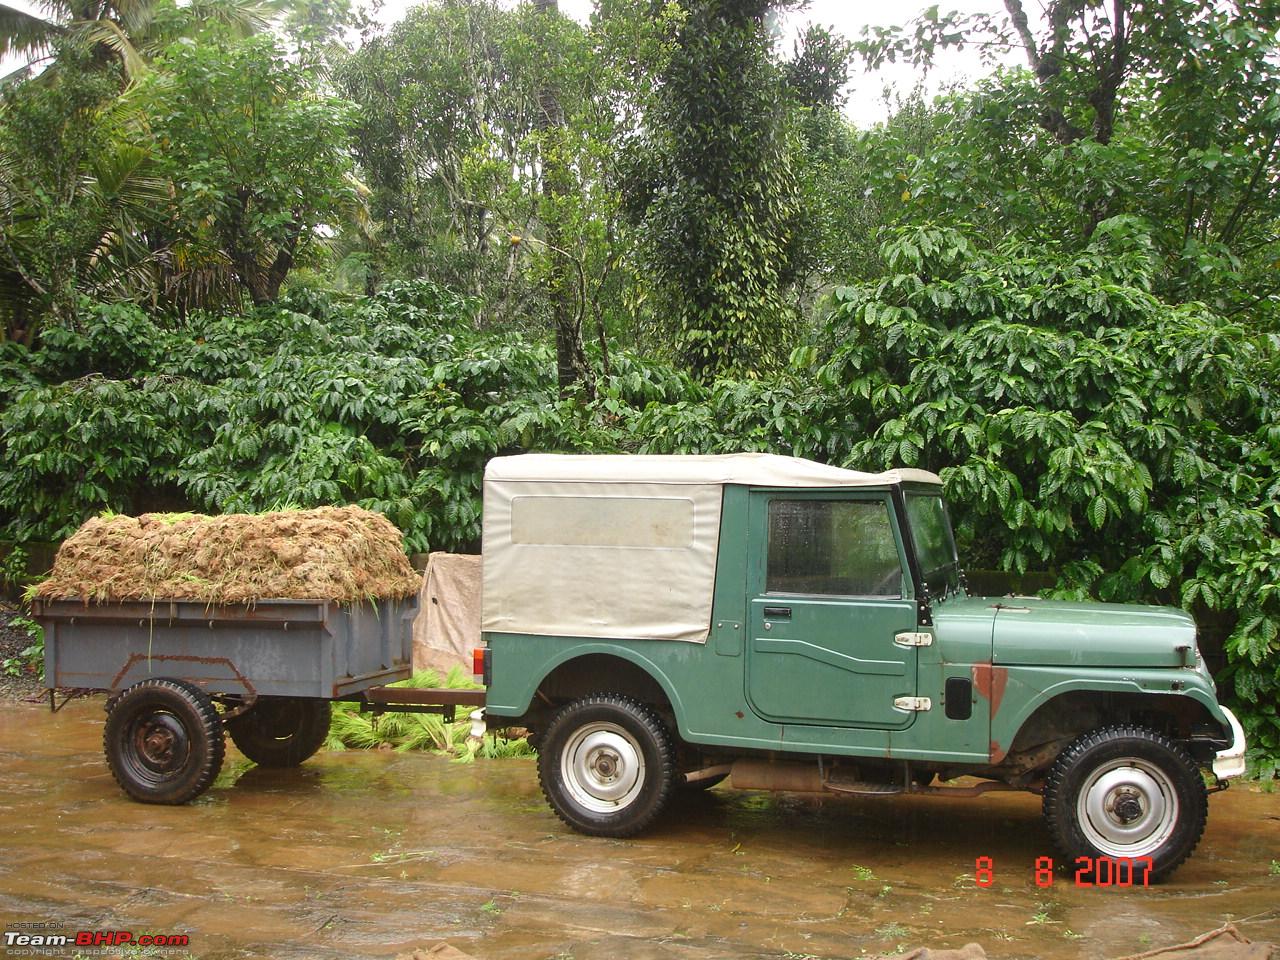 Trailers for carrying jeeps & farm purposes - What, How in India - Page 3 -  Team-BHP